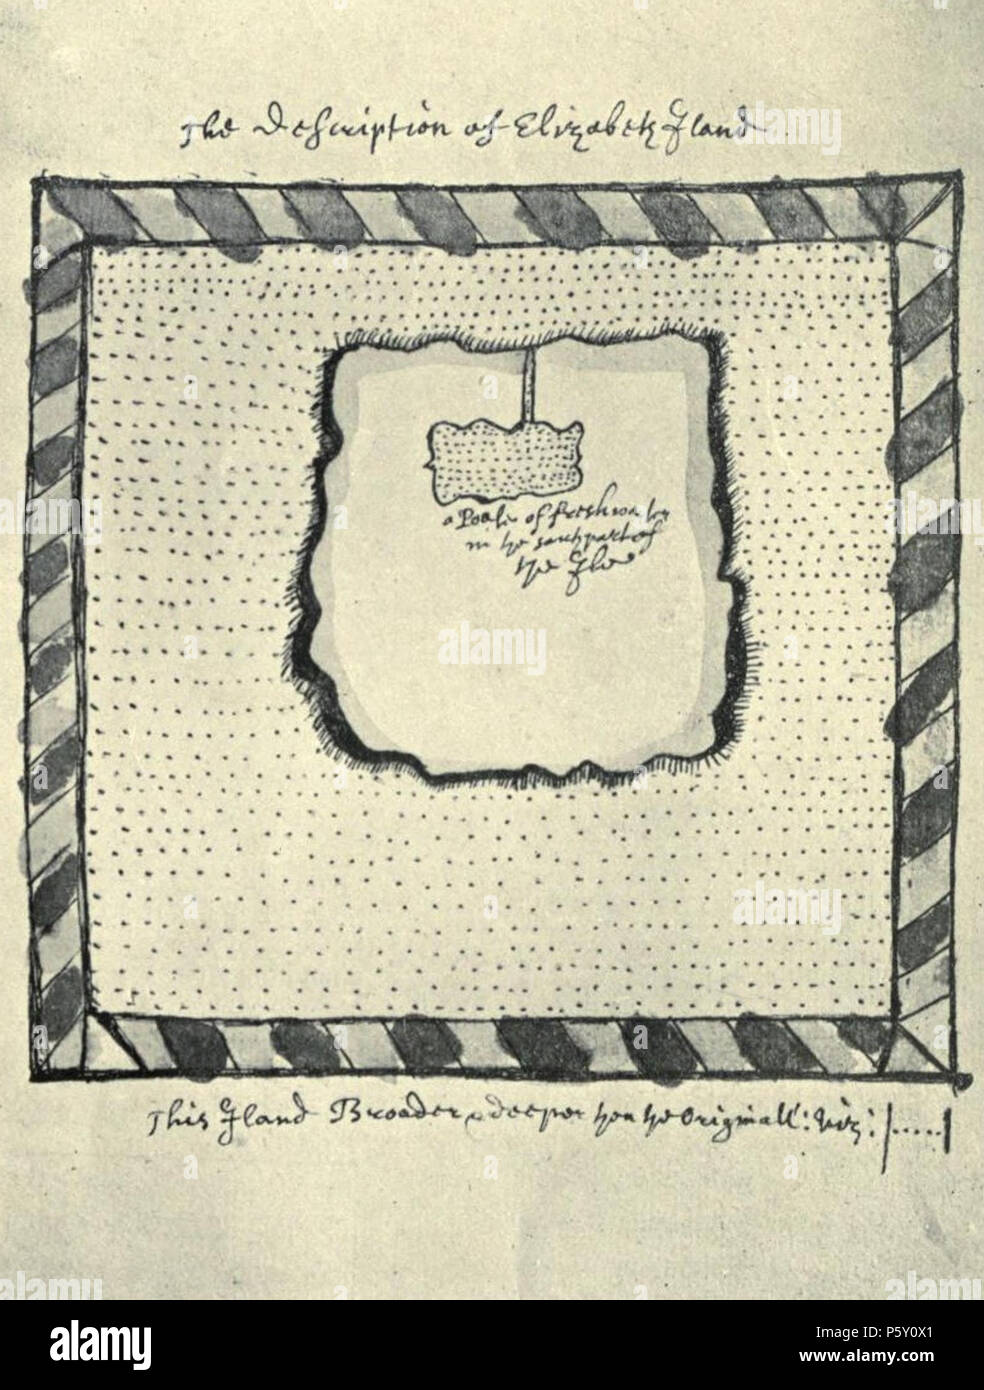 N/A. English: Copy by John Conyers of Francis Fletcher's map of Elizabeth Island, off Cape Horn, forming part of the British Library's Sloane Manuscript 61. Map is headed 'The Description of Elizabeth Iland', the note in the middle of it reads 'a Poole of freshwater in the south part of the Ile', and the note at the foot 'This Iland Broader & deeper then the Originall: Viz: |.....|' . 1677. John Conyers (fl. 1677), after Francis Fletcher (c. 1555-1619) 505 Elizabeth Island Stock Photo